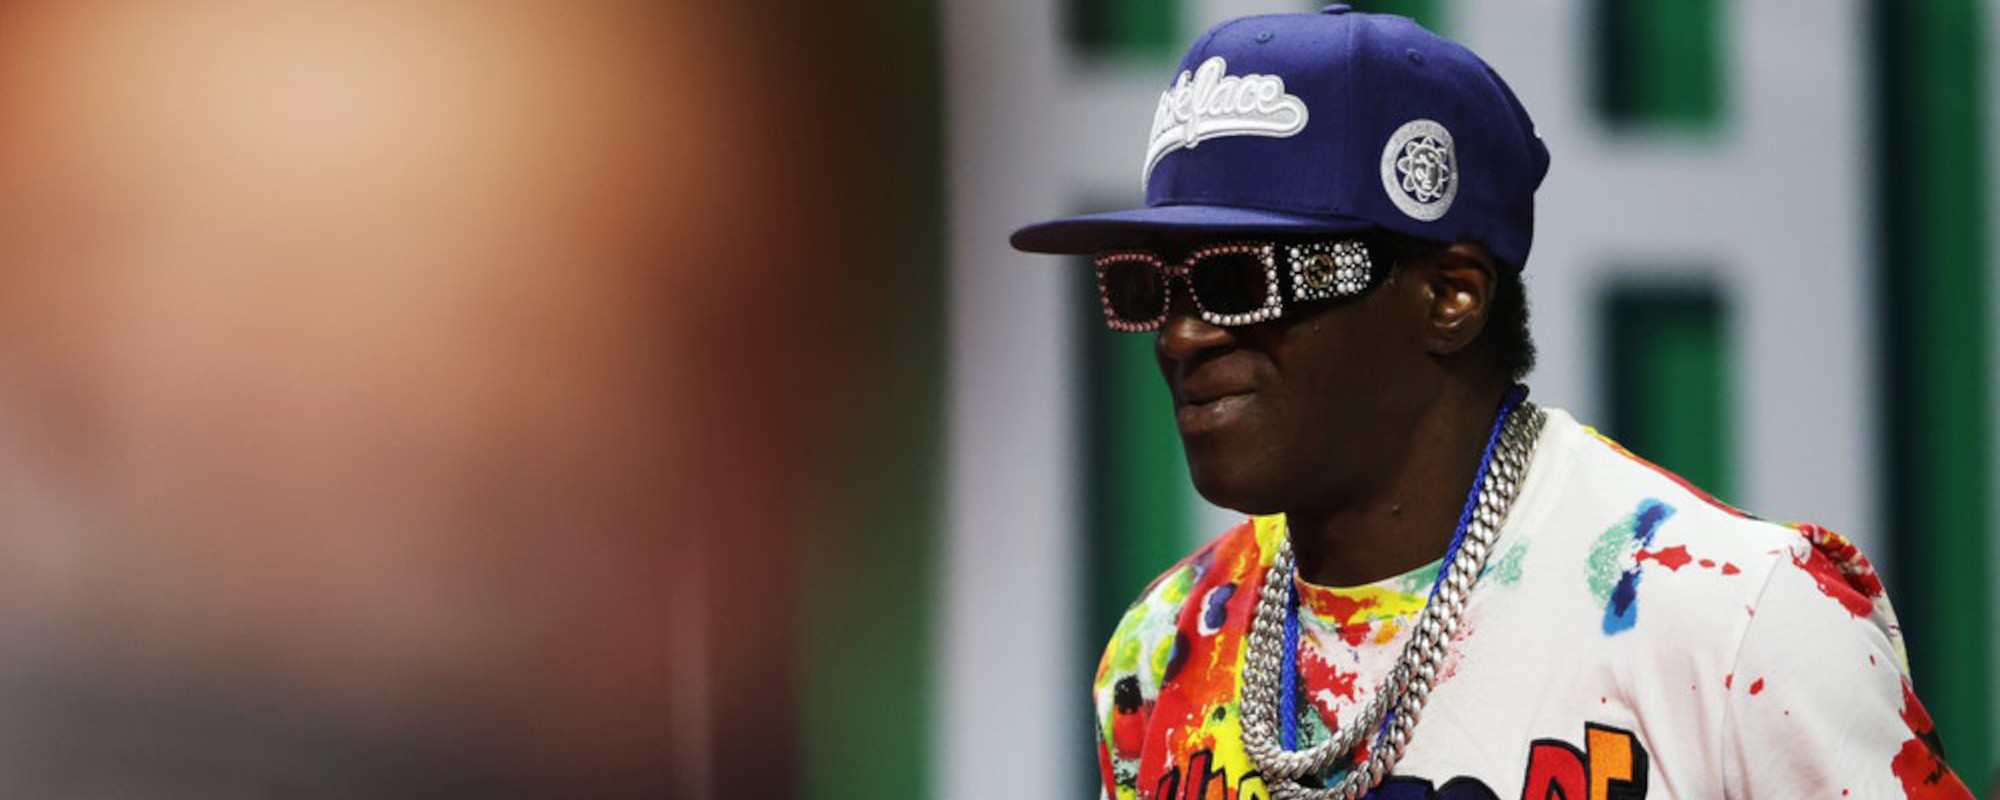 The Tasteful Meaning Behind the Name Flavor Flav